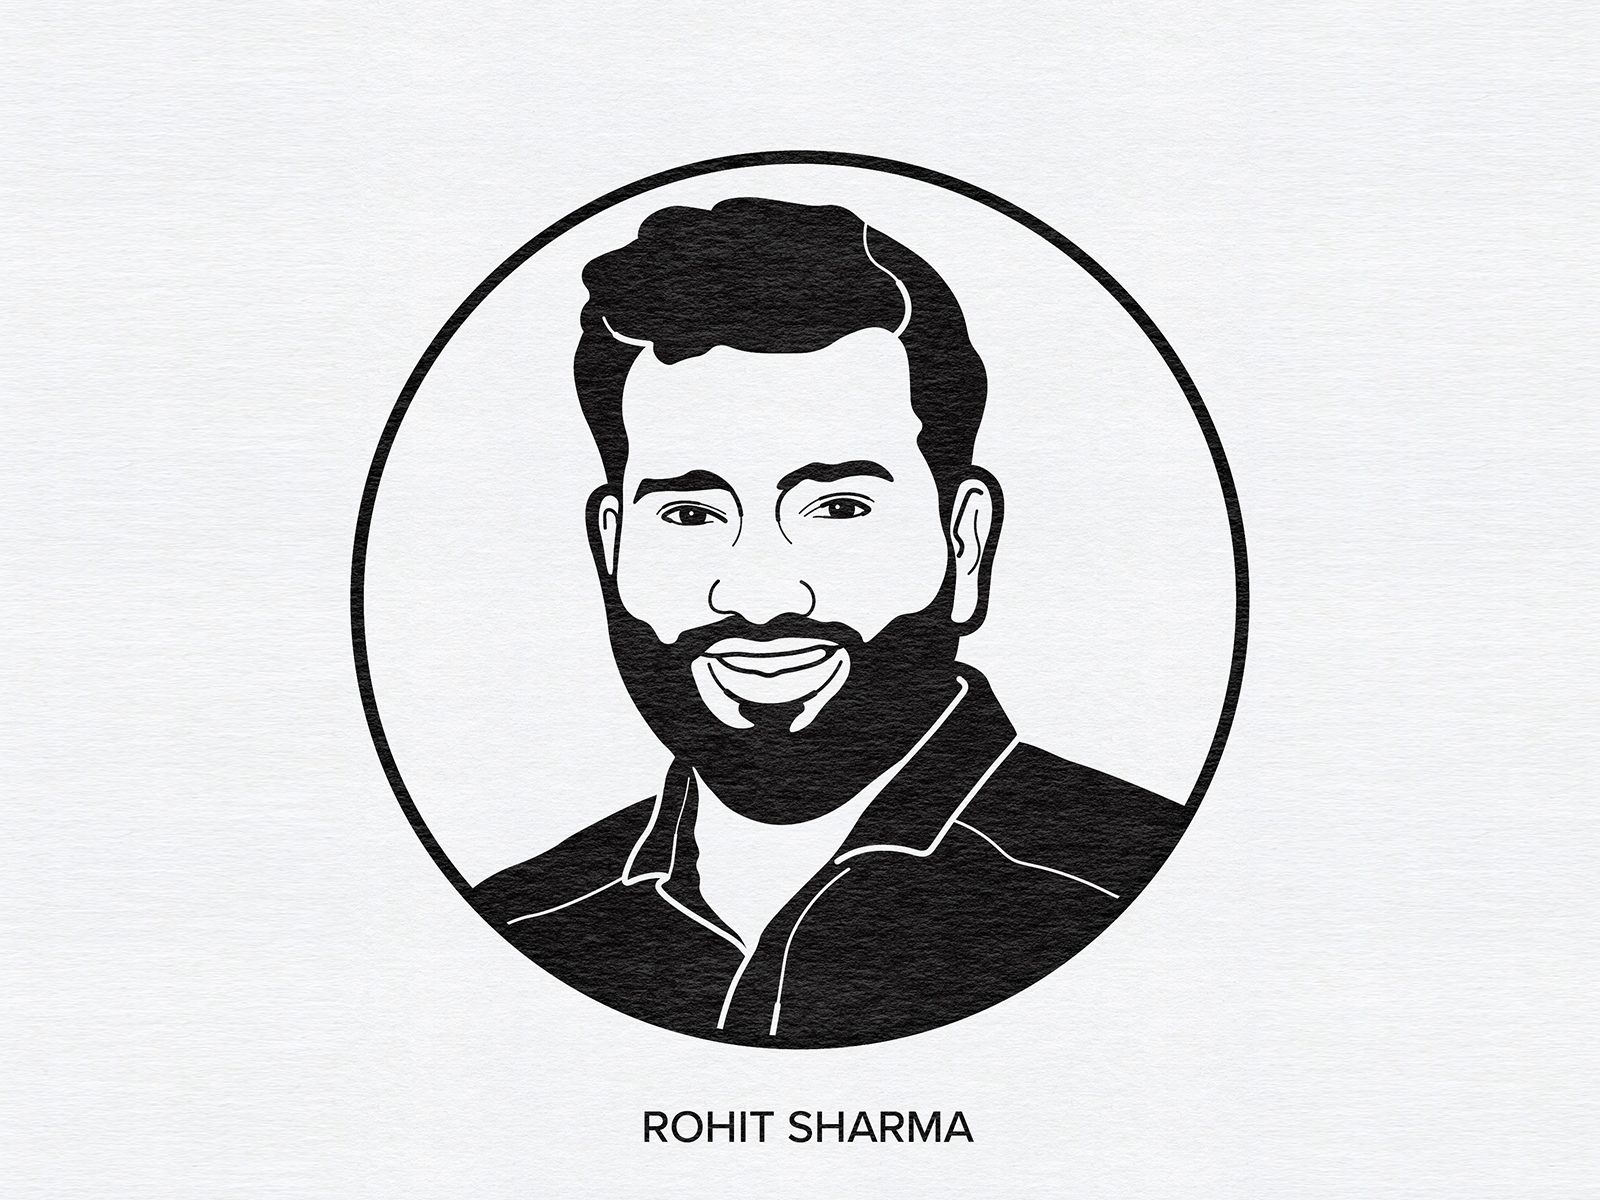 Rohit Sharma's Sketch By His Fan Receives Immense Appreciation